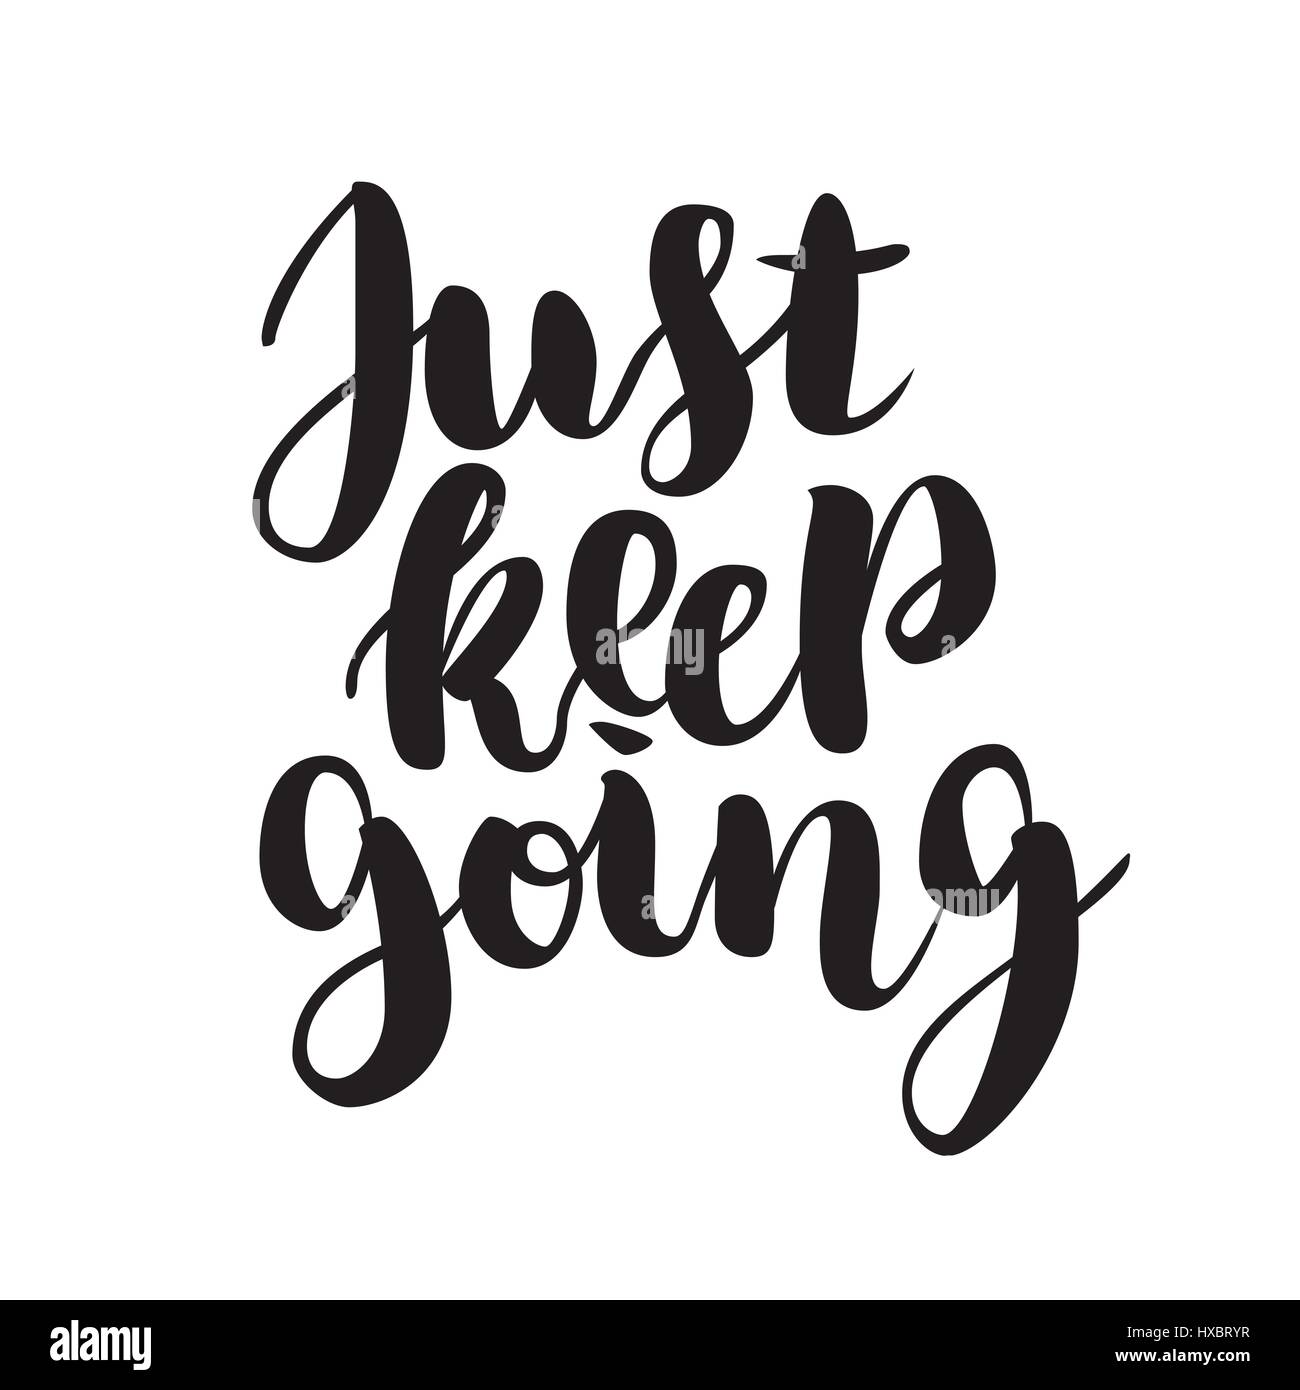 Just keep going lettering quote card. Vector illustration with slogan. Template design for poster, greeting card, t-shirts, prints, banners isolated on white Stock Vector